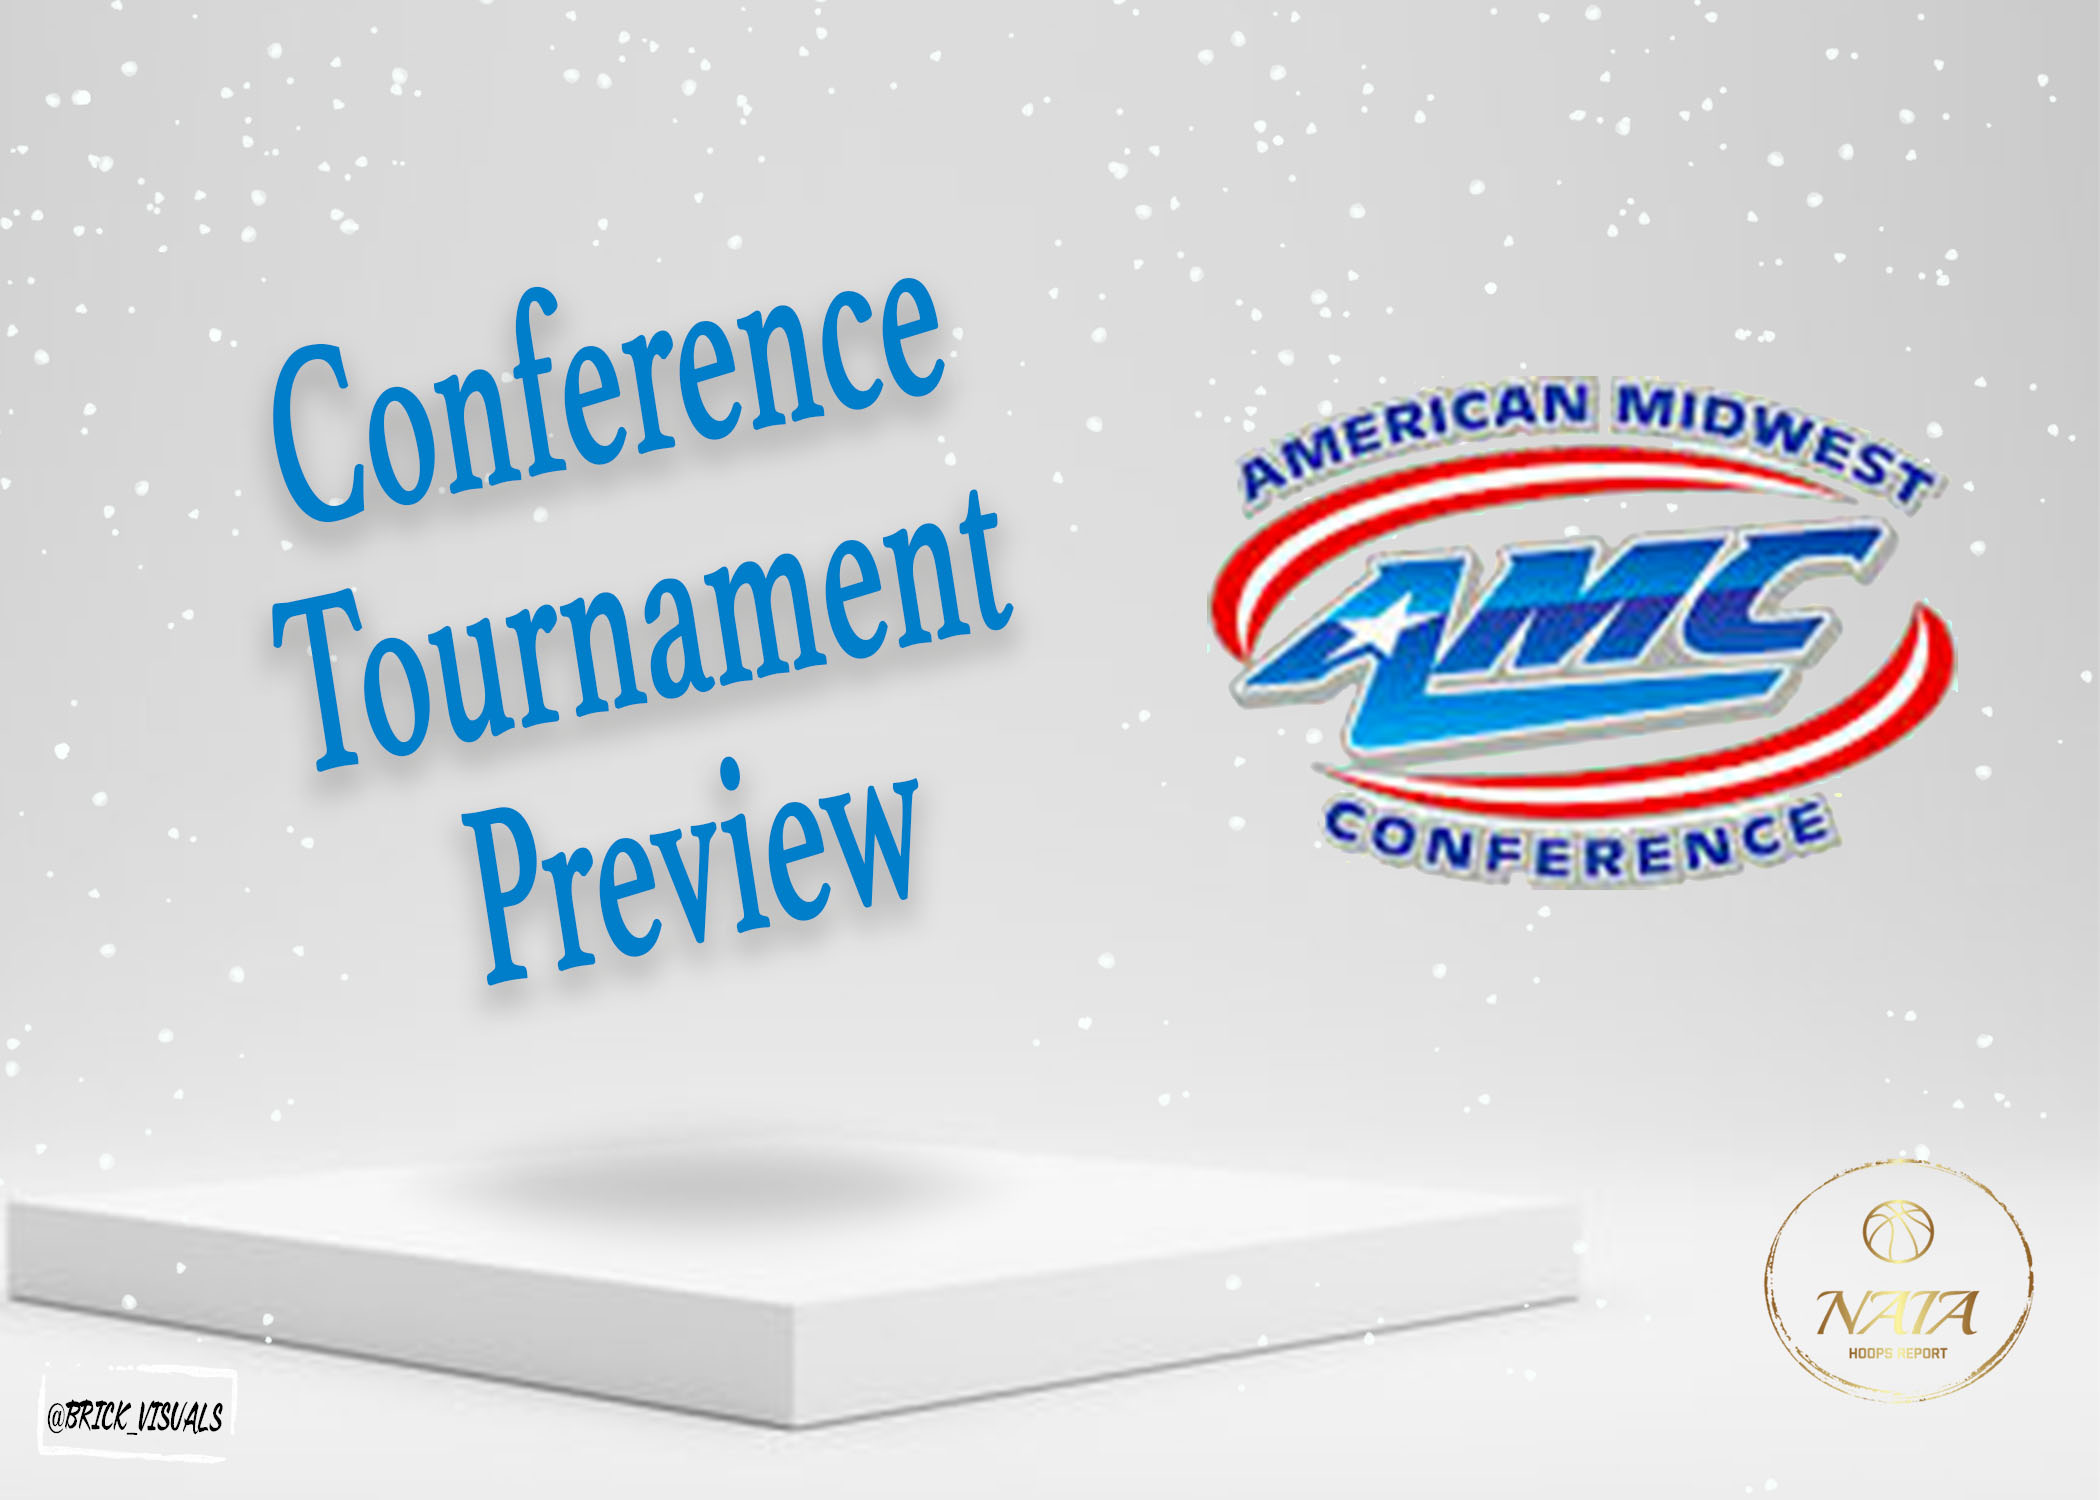 American Midwest Conference Tournament – Championship Preview